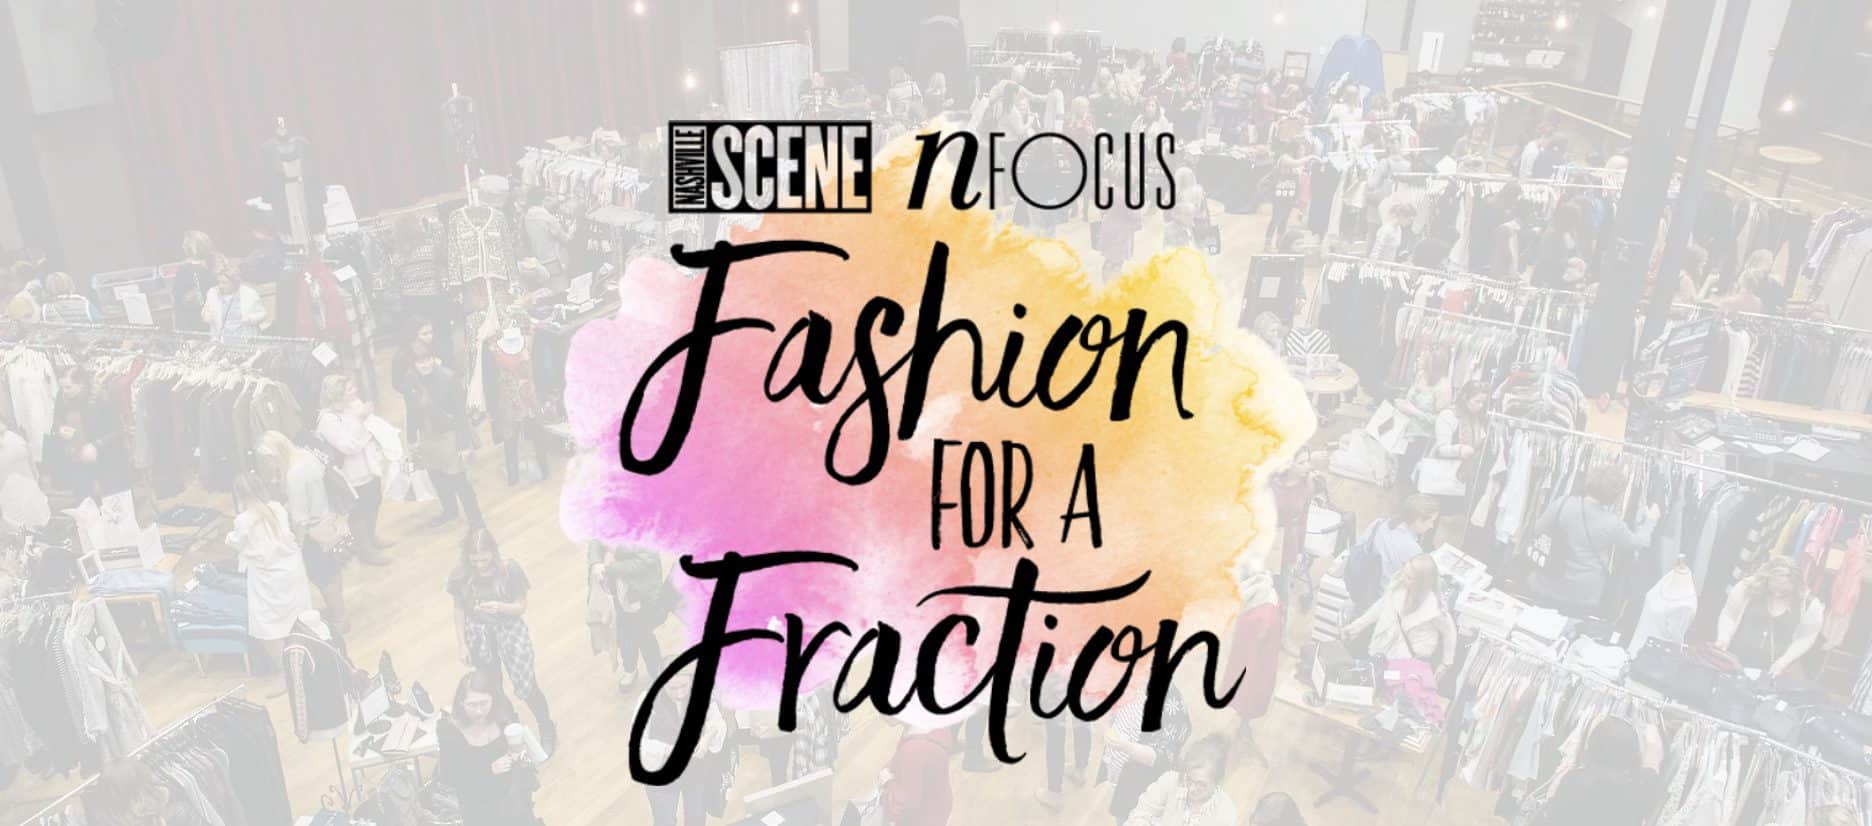 Fashion for a Fraction shopping event in Nashville, TN, shop huge discounts on apparel, handbags, jewelry, accessories and more from your favorite Nashville boutiques!